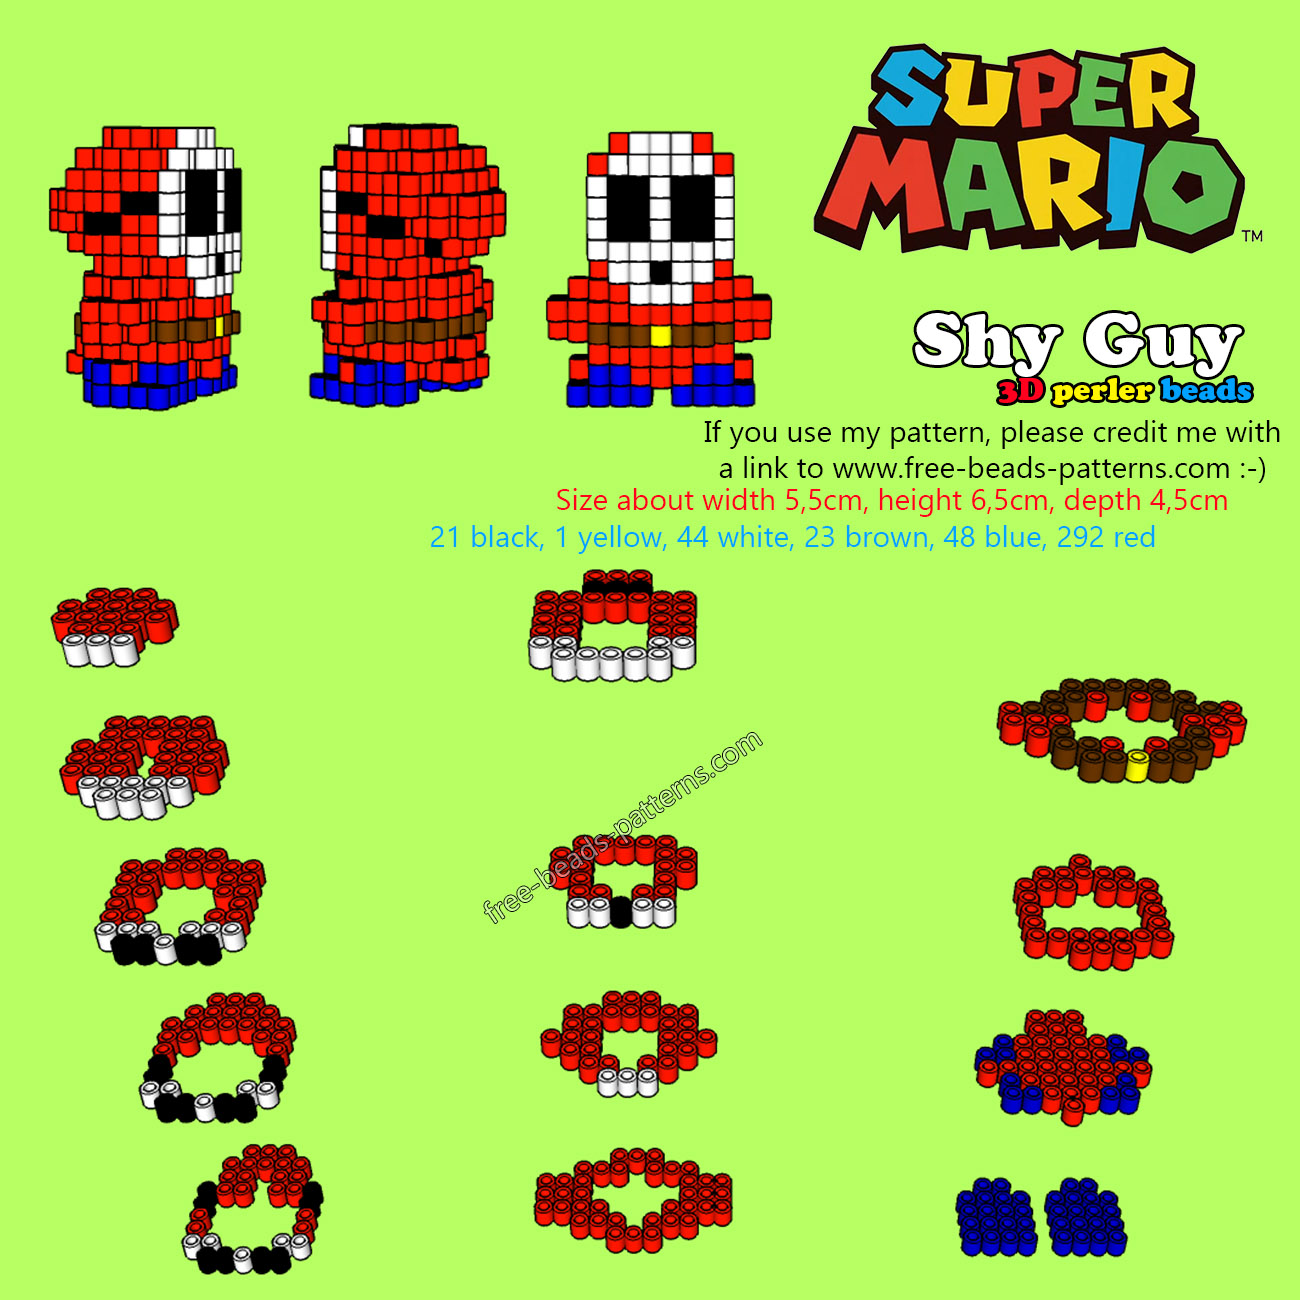 3D perler beads pattern Shy Guy from Super Mario